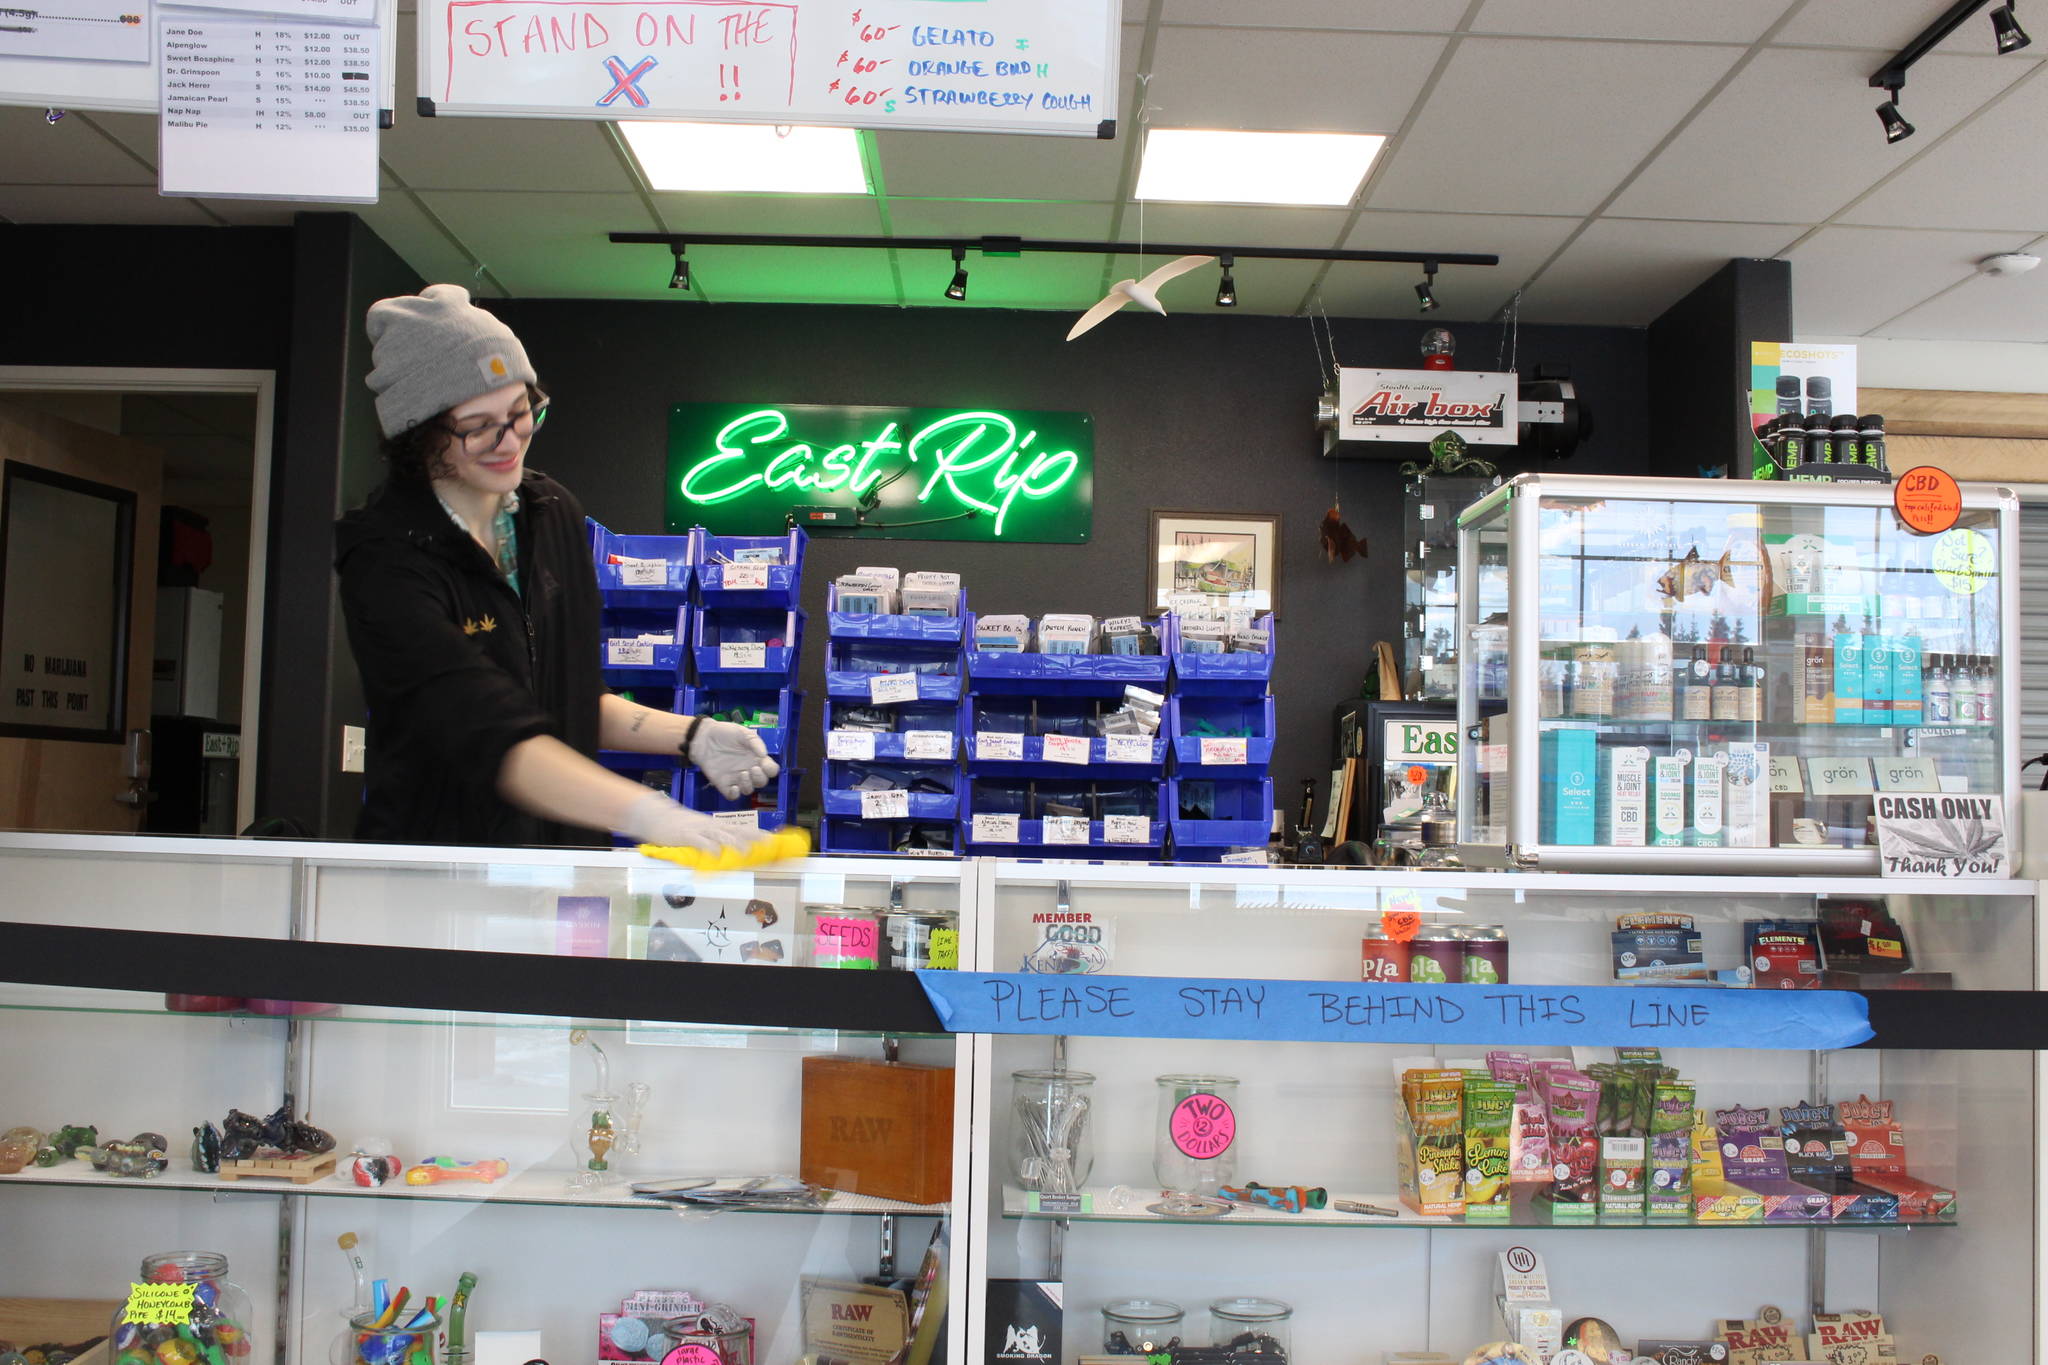 Mariah Schloeman wipes down the counter at East Rip in Kenai, Alaska on March 25, 2020. The store has implemented more stringent cleaning protocols, including wiping down surfaces after every transaction, in the wake of the coronavirus pandemic. (Photo by Brian Mazurek/Peninsula Clarion)